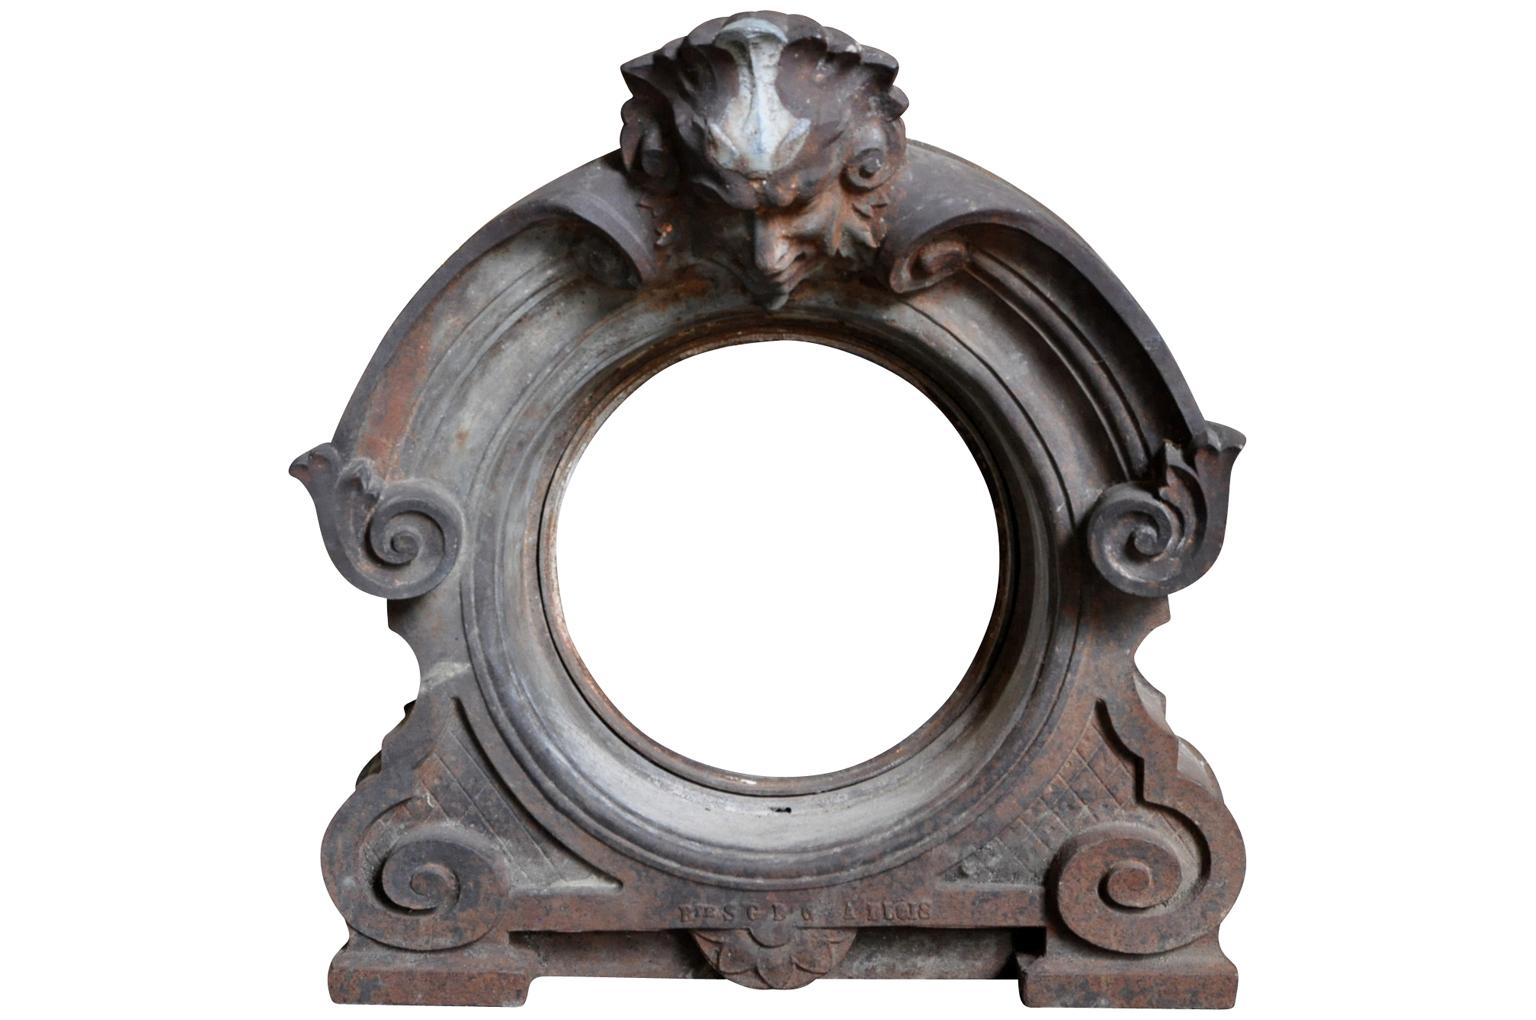 An outstanding later 19th century French L'oeil Du Boeuf, window frame in cast iron. Wonderful to incorporate into a construction or convert into a mirror.